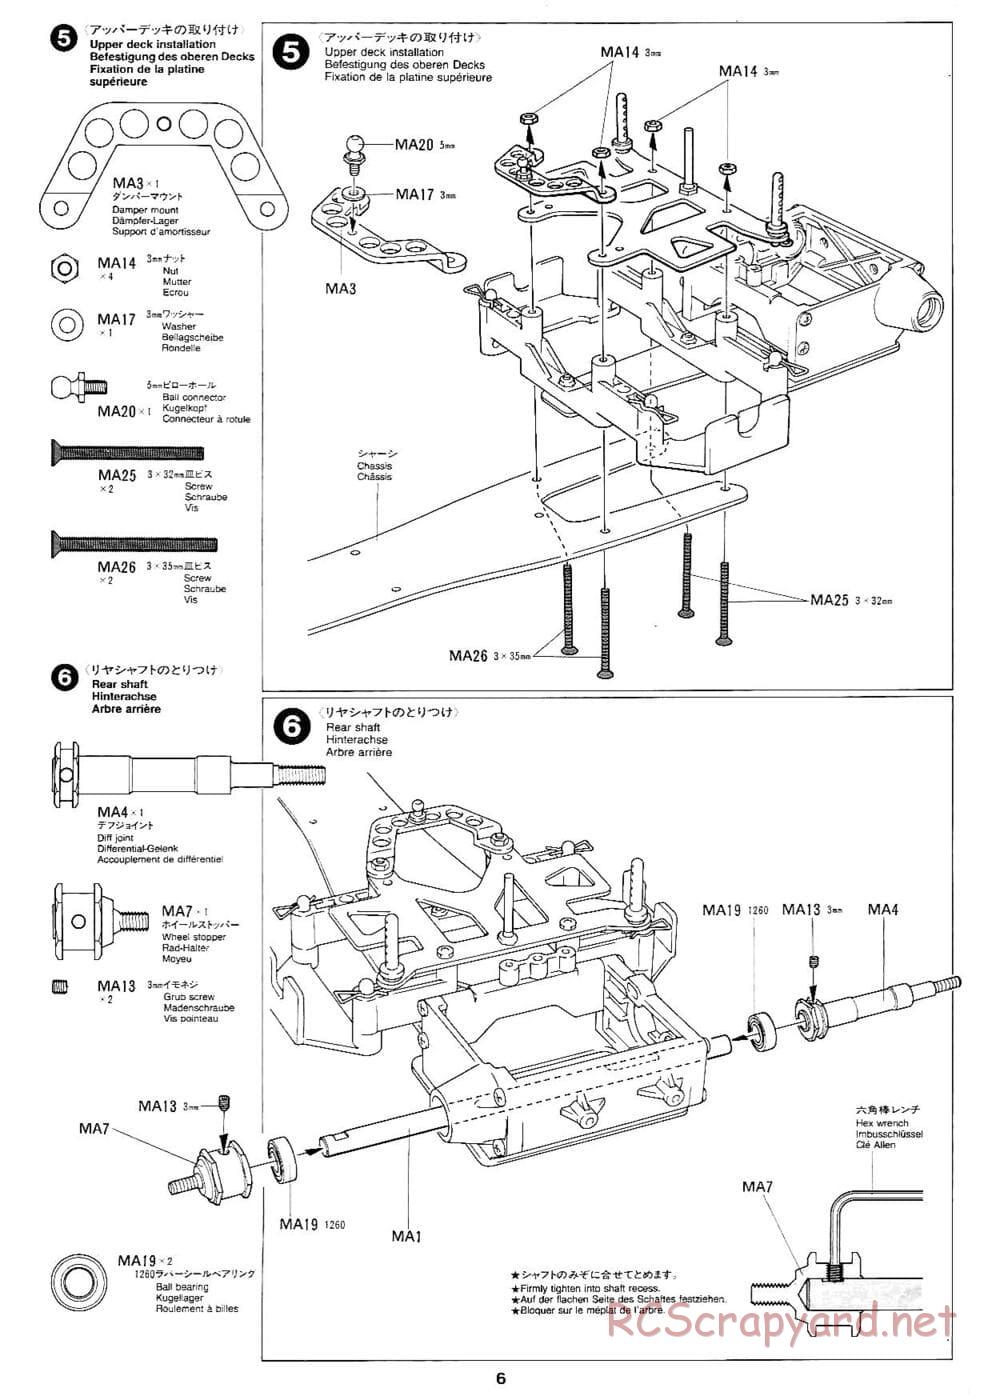 Tamiya - Toyota GT-One TS020 - F103RS Chassis - Manual - Page 6